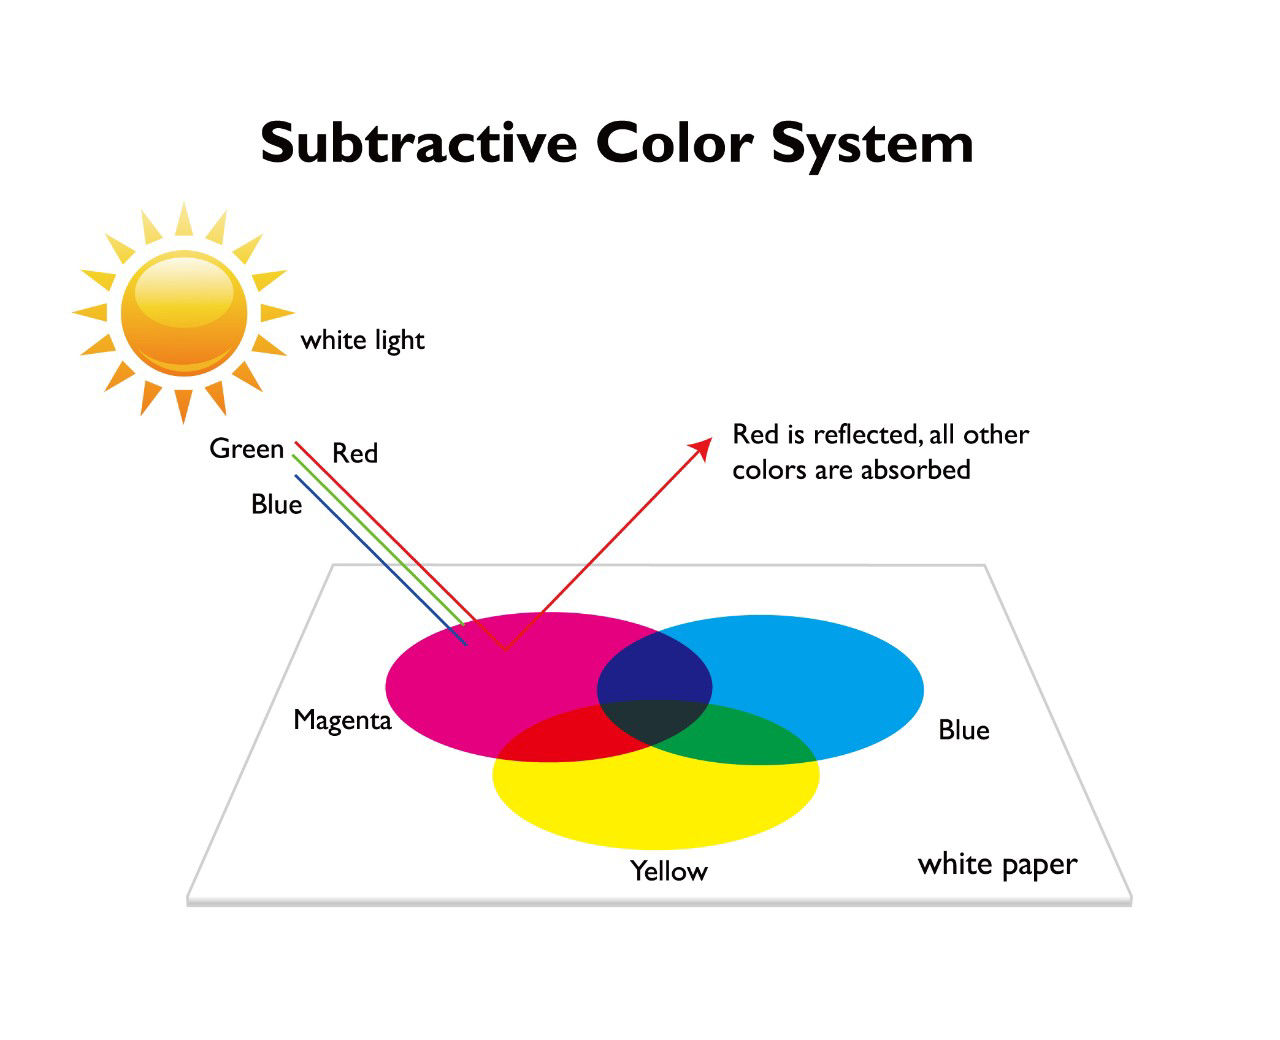 The picture takes red light for example and explains all other colors are absorbed when right light is reflected from the sun to the white paper in subtractive color system.